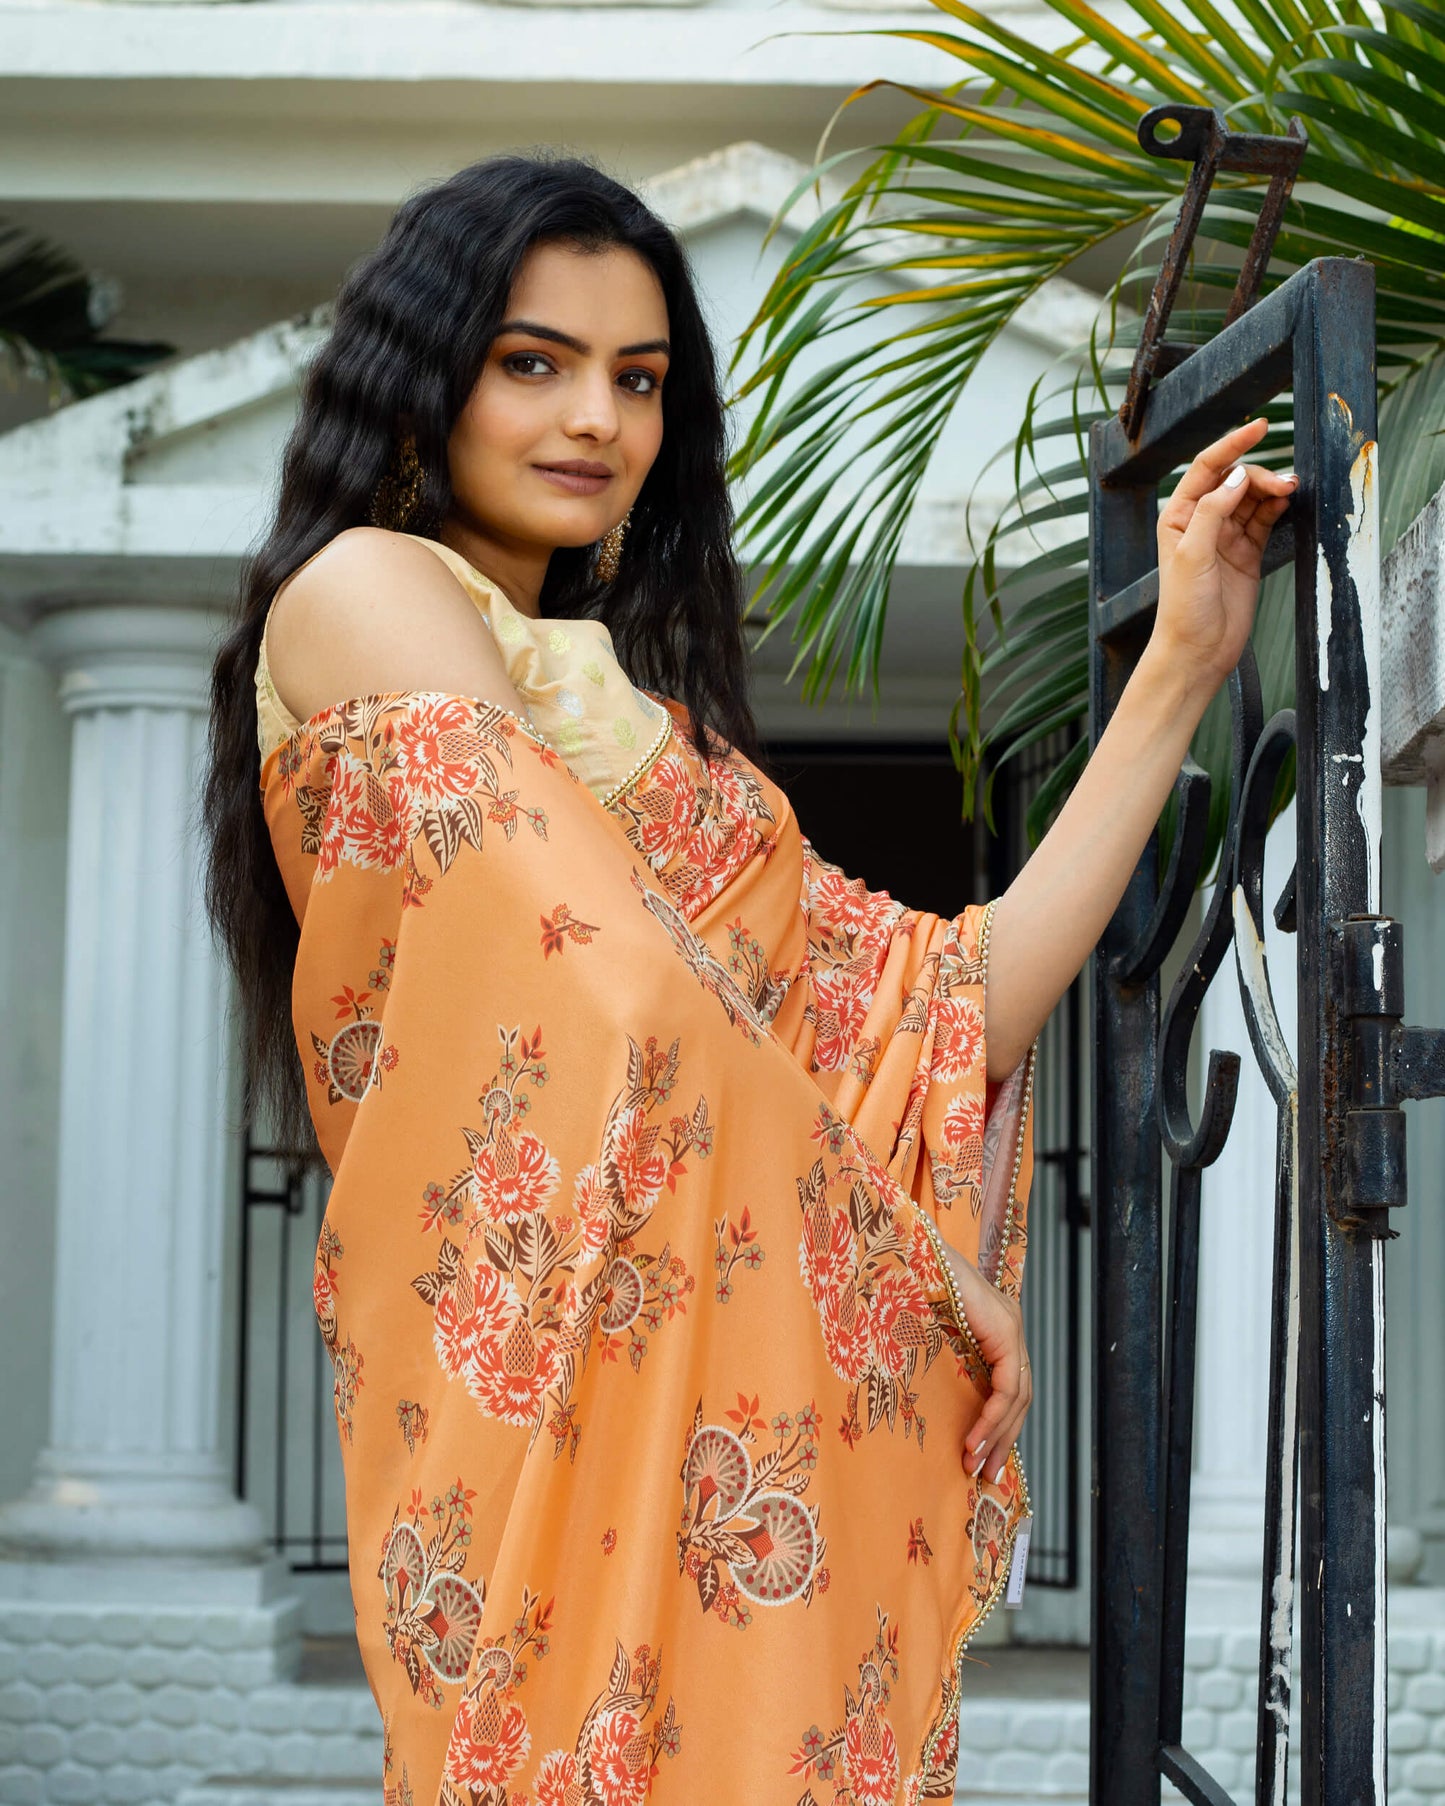 Royal Orange And Red Floral Pattern Digital Print Crepe Silk Saree With Pearl Work Lace Border